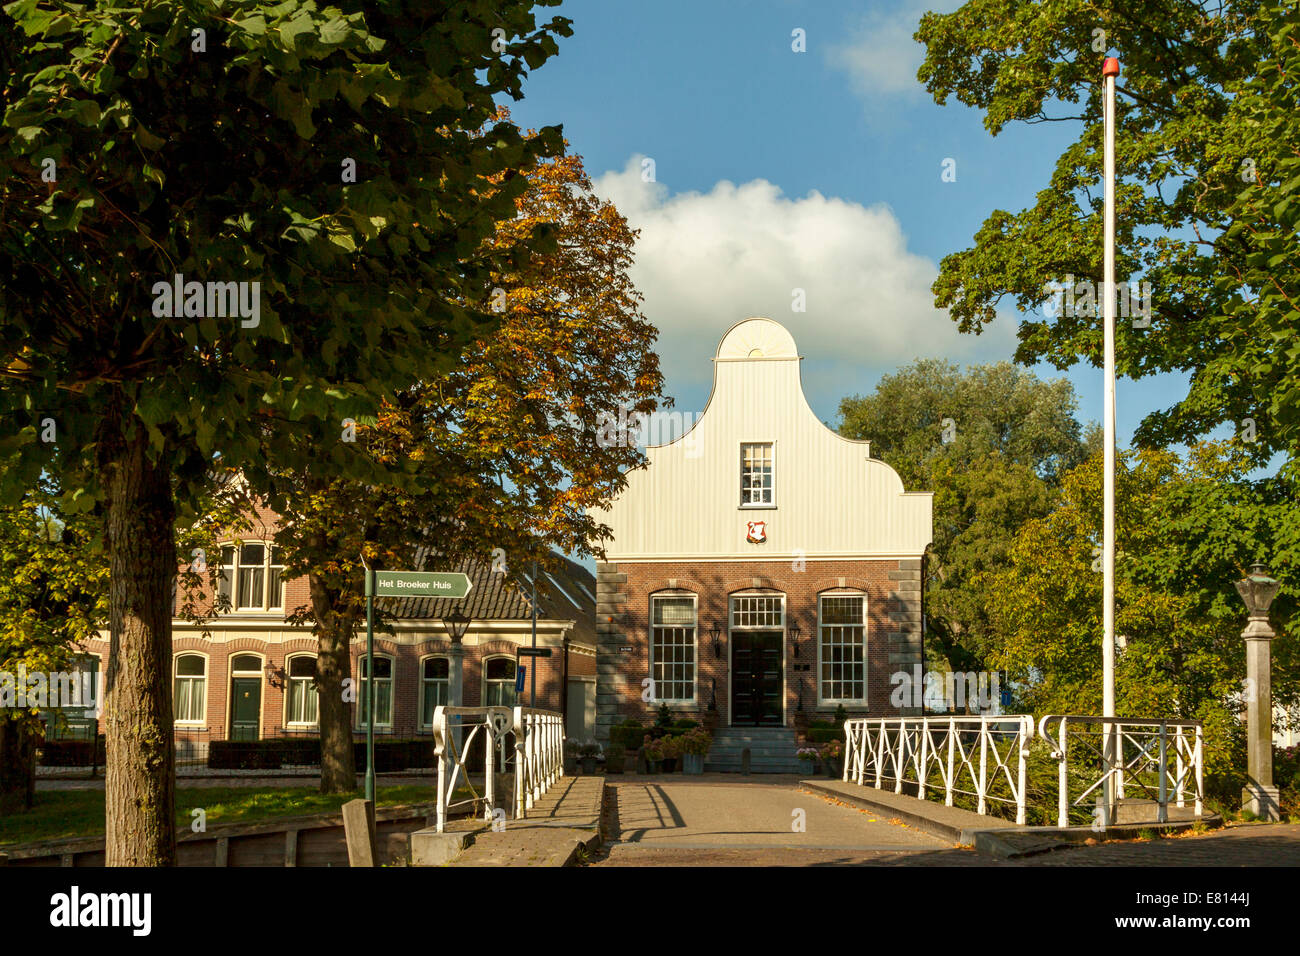 Broek in Waterland, North Holland, The Netherlands: Historic architecture in a village just to the north of Amsterdam. Stock Photo